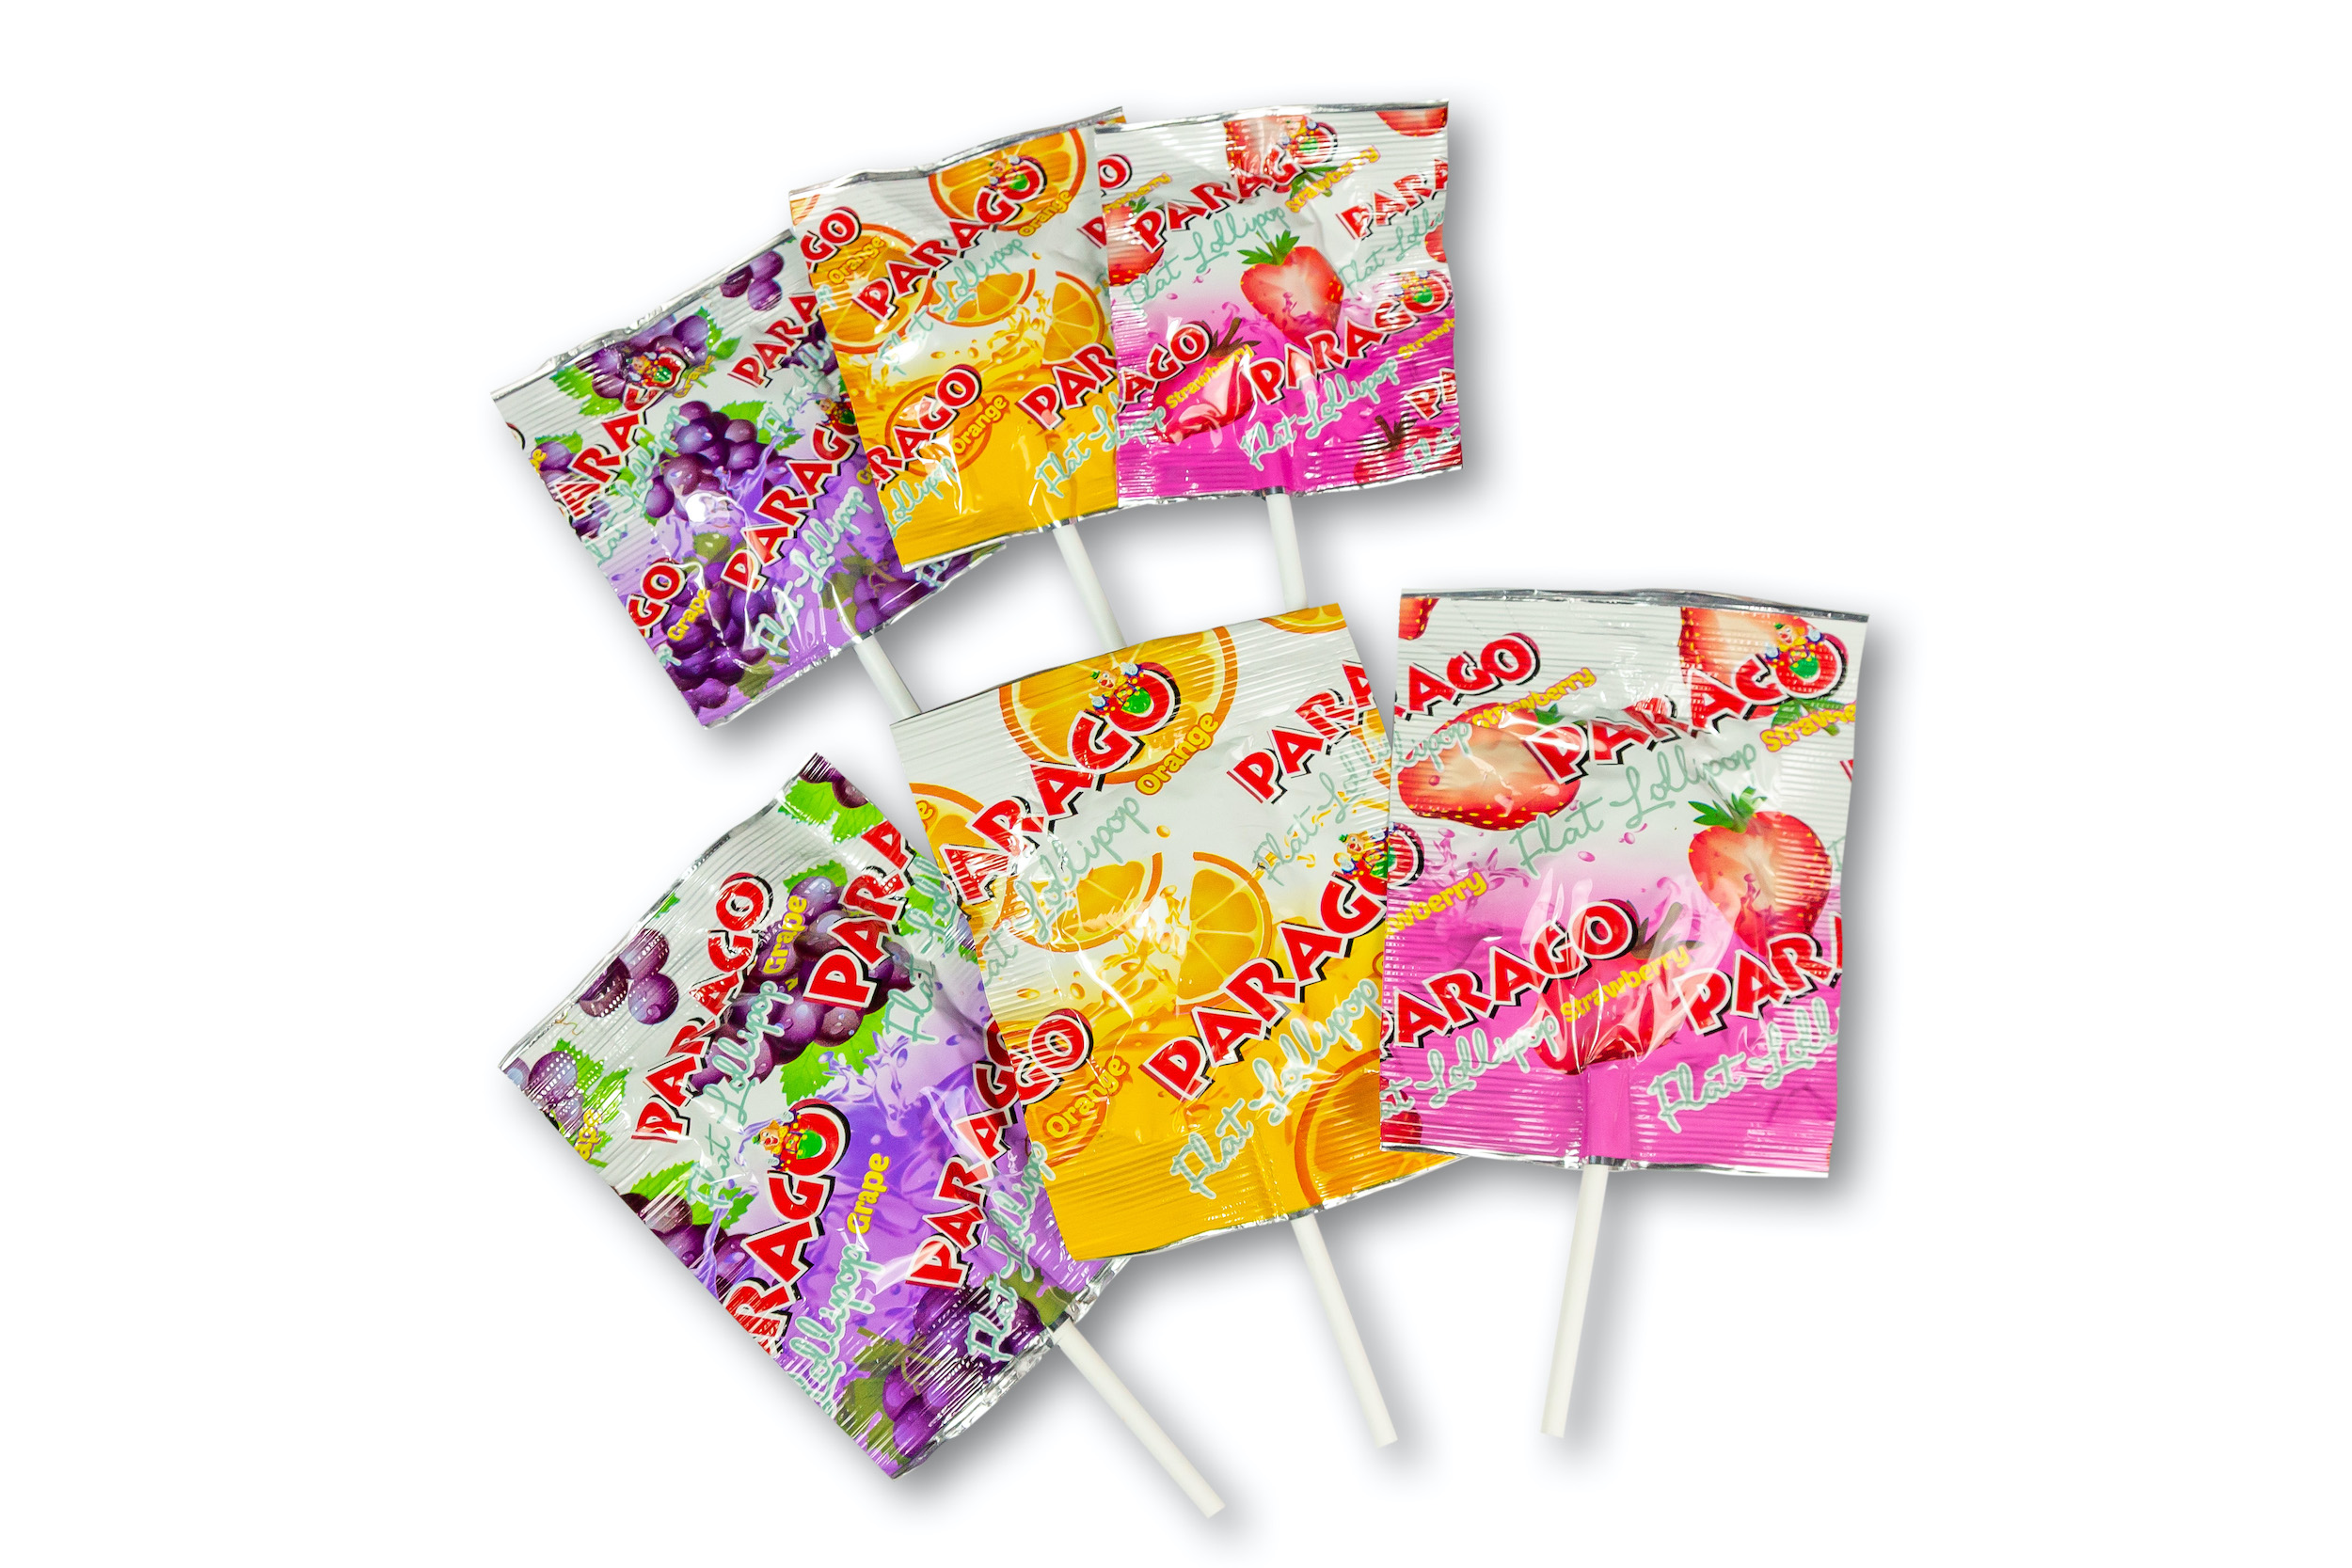 Treat yourself to a uniquely flat lollipop of assorted fruity flavours – Strawberry, Grape, and Orange. Parago Flat Lollipop is perfect for adding colour to your beautiful lollipop bouquets, prizes for young children,sweet treats for your school/office/dental/health clinic or to fill your goody bags and your candy jar. Try them all, and see which enticing flavour is your favourite. It is individually wrapped, perfect to be eaten on the go.